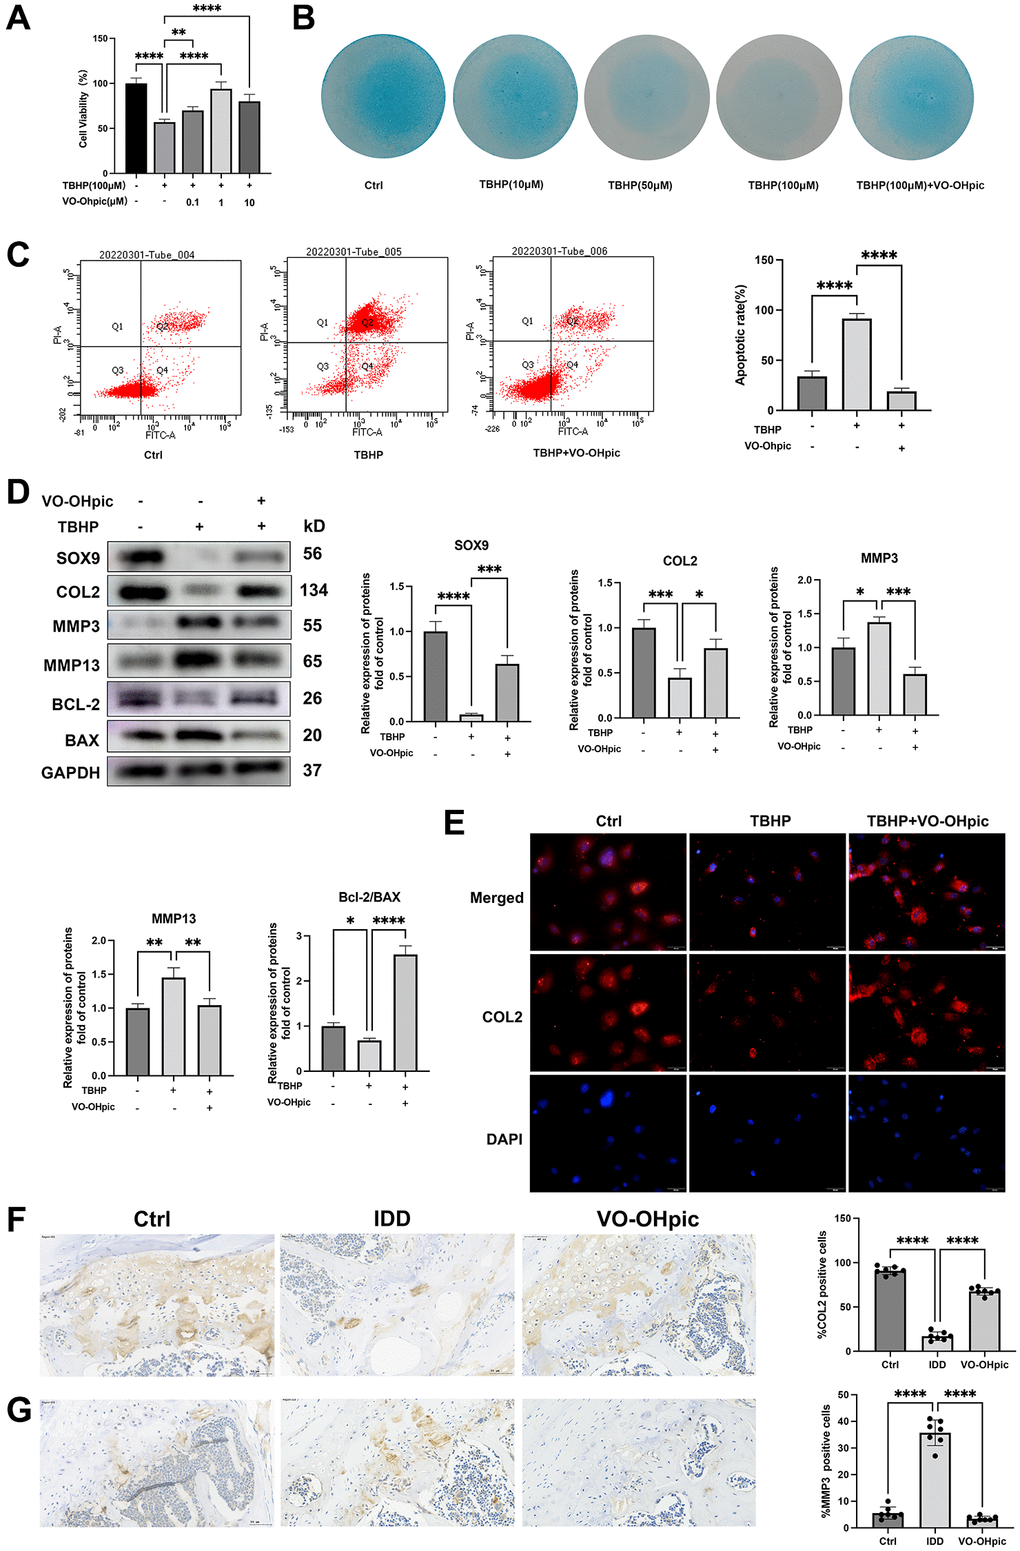 VO-OHpic inhibited oxidative stress induced endplate chondrocytes apoptosis and CEP degeneration. (A) CEP chondrocytes were isolated and treated with 100 μM TBHP with increasing concentrations (0, 0.1, 1, 10 μM) of VO-OHpic for 24 hours, CCK assay was conducted to evaluate the cell viability. (B) CEP chondrocytes were treated with increasing concentrations of TBHP and 1 μM VO-OHpic for 7 days and Alcian blue staining was conducted to examine the ECM production. (C) Flow cytometric analysis of endplate chondrocytes stained with Annexin V-FITC/PI. Percentage of apoptosis rates was expressed as means ± SD from three independent experiments. (D) CEP chondrocytes were pretreated with VO-OHpic (1 μM) for 18 hours, then 100 μM TBHP was added for 6 hours. Western blot was conducted to examine the protein levels of SOX9, COL2, MMP3, MMP13, BCL-2 and BAX. The band density of SOX9, COL2, MMP3, MMP13 and the ratio of BCL-2/BAX were quantified and normalized to control. (E) CEP chondrocytes were pretreated with VO-OHpic (1 μM) for 18 hours, then 100 μM TBHP was added for 6 hours. Immunofluorescence staining was conducted to examine the expression of COL2 (red). Scale bar = 20 μm. (F, G) Immunohistochemistry for COL2 and MMP3 in cartilage endplate from each group. Scale bar = 20 μm. The ratio of positive cells for COL2 and MMP3 was quantified under a microscope at 400× magnification using five sections from seven mice. Data are presented as mean ± SD from three independent experiments. *P **P ***P ****P 